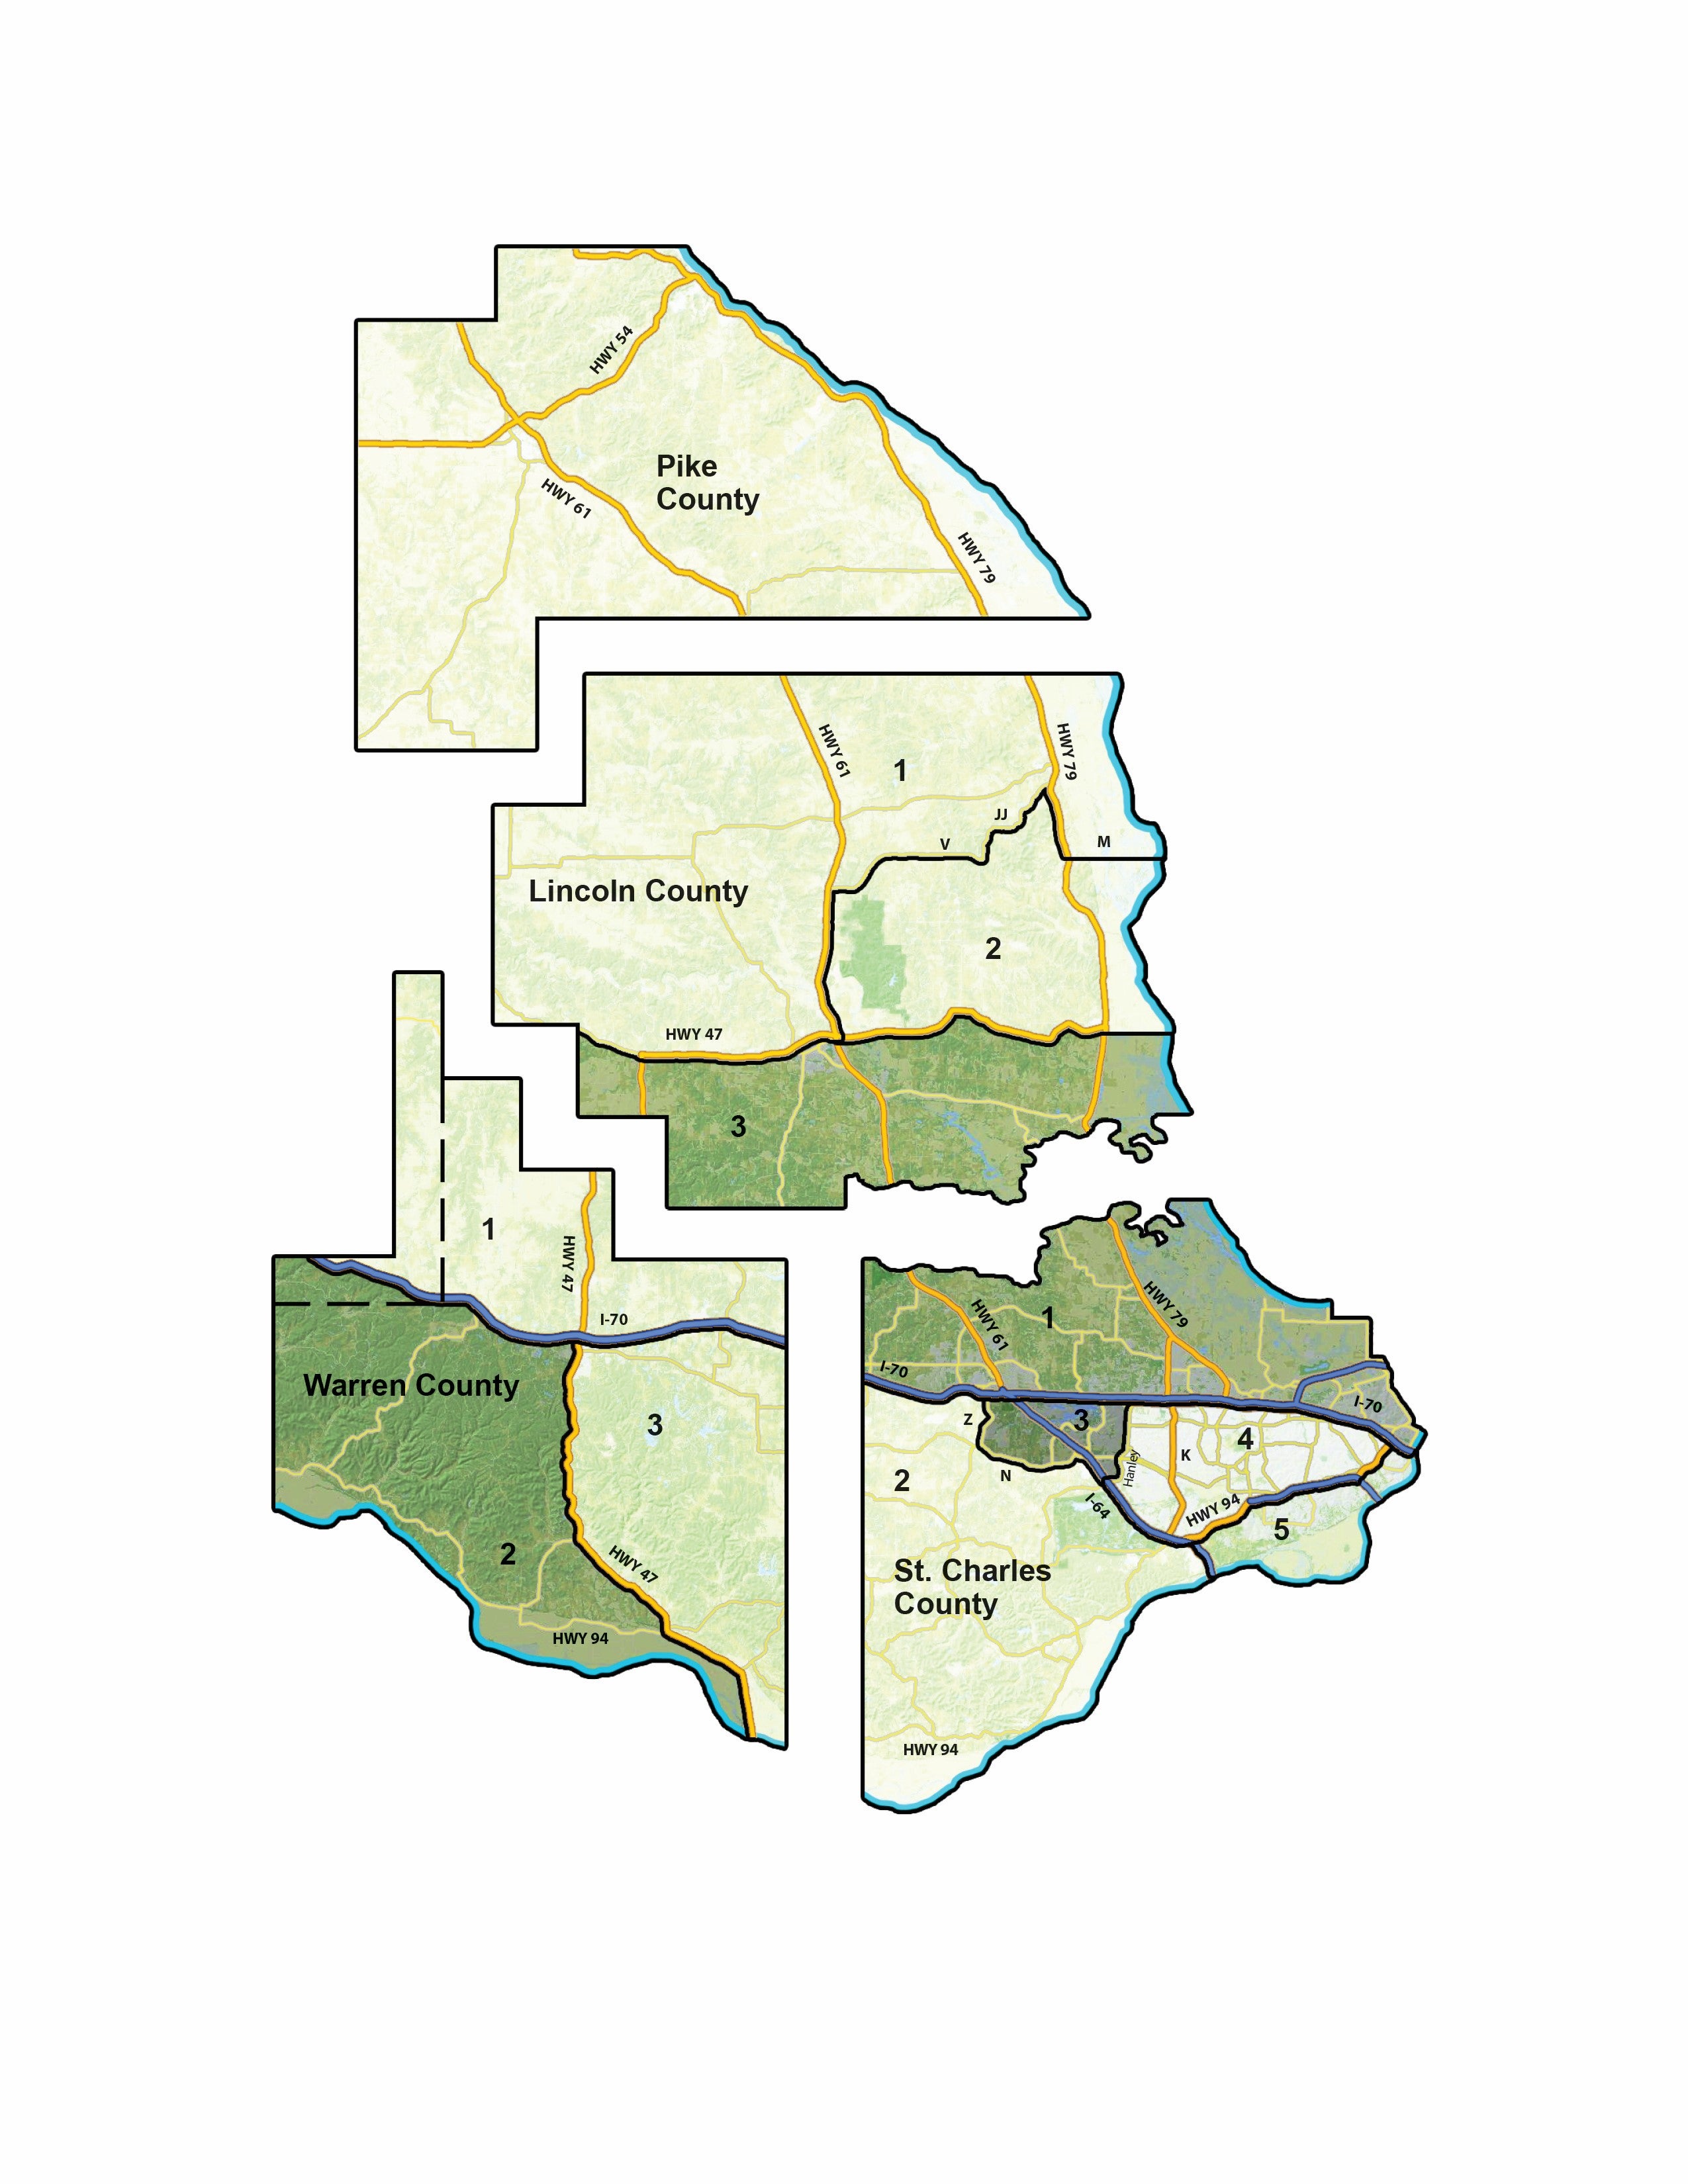 CREC territory map. Shaded territories indicate districts seeking candidates.